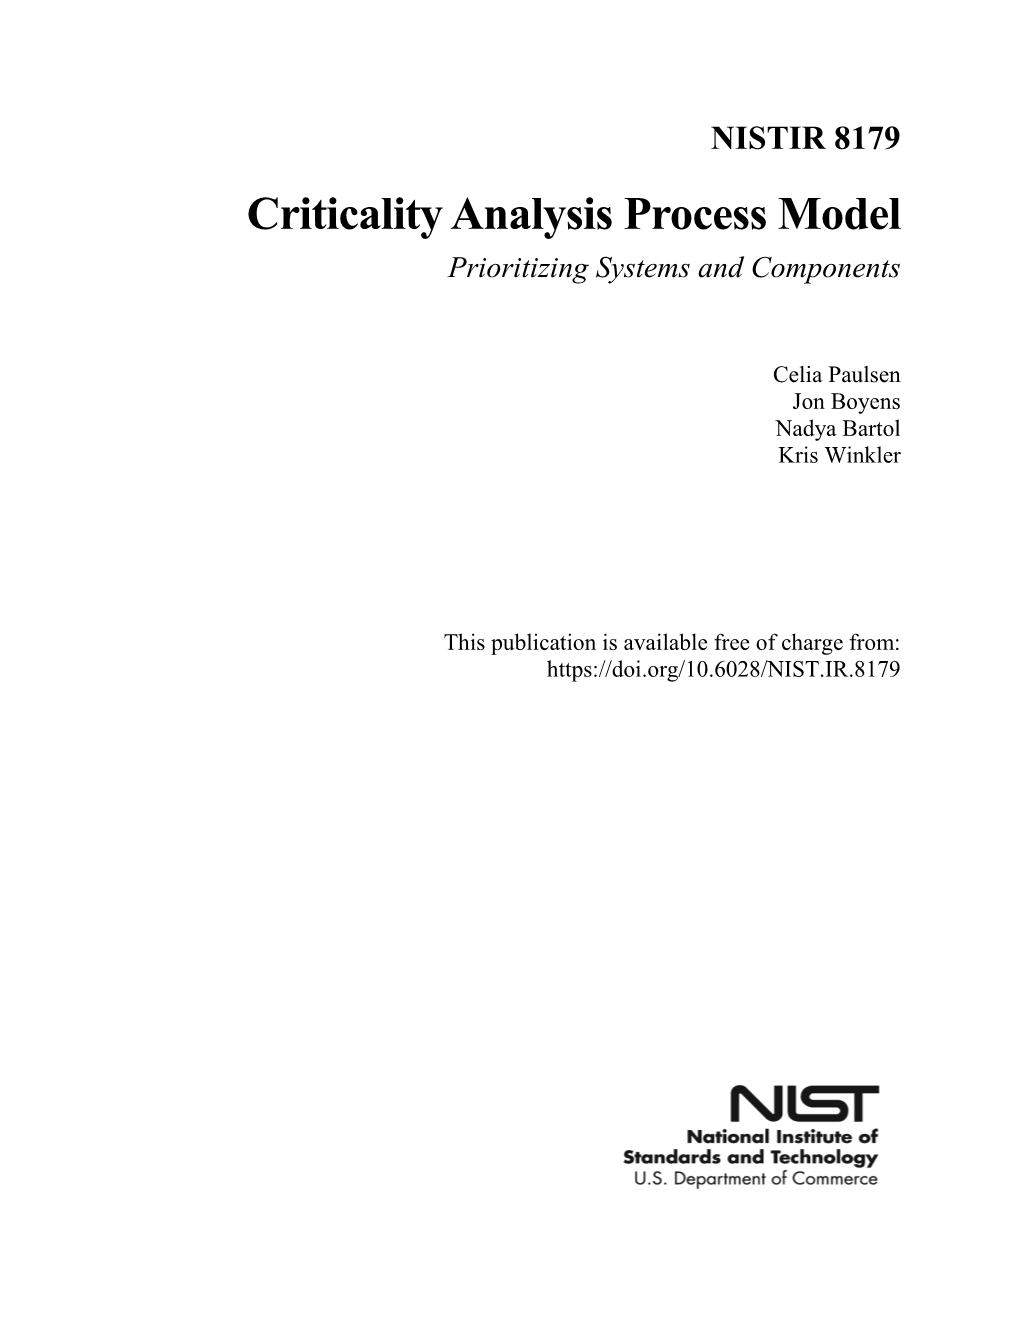 Criticality Analysis Process Model: Prioritizing Systems and Components